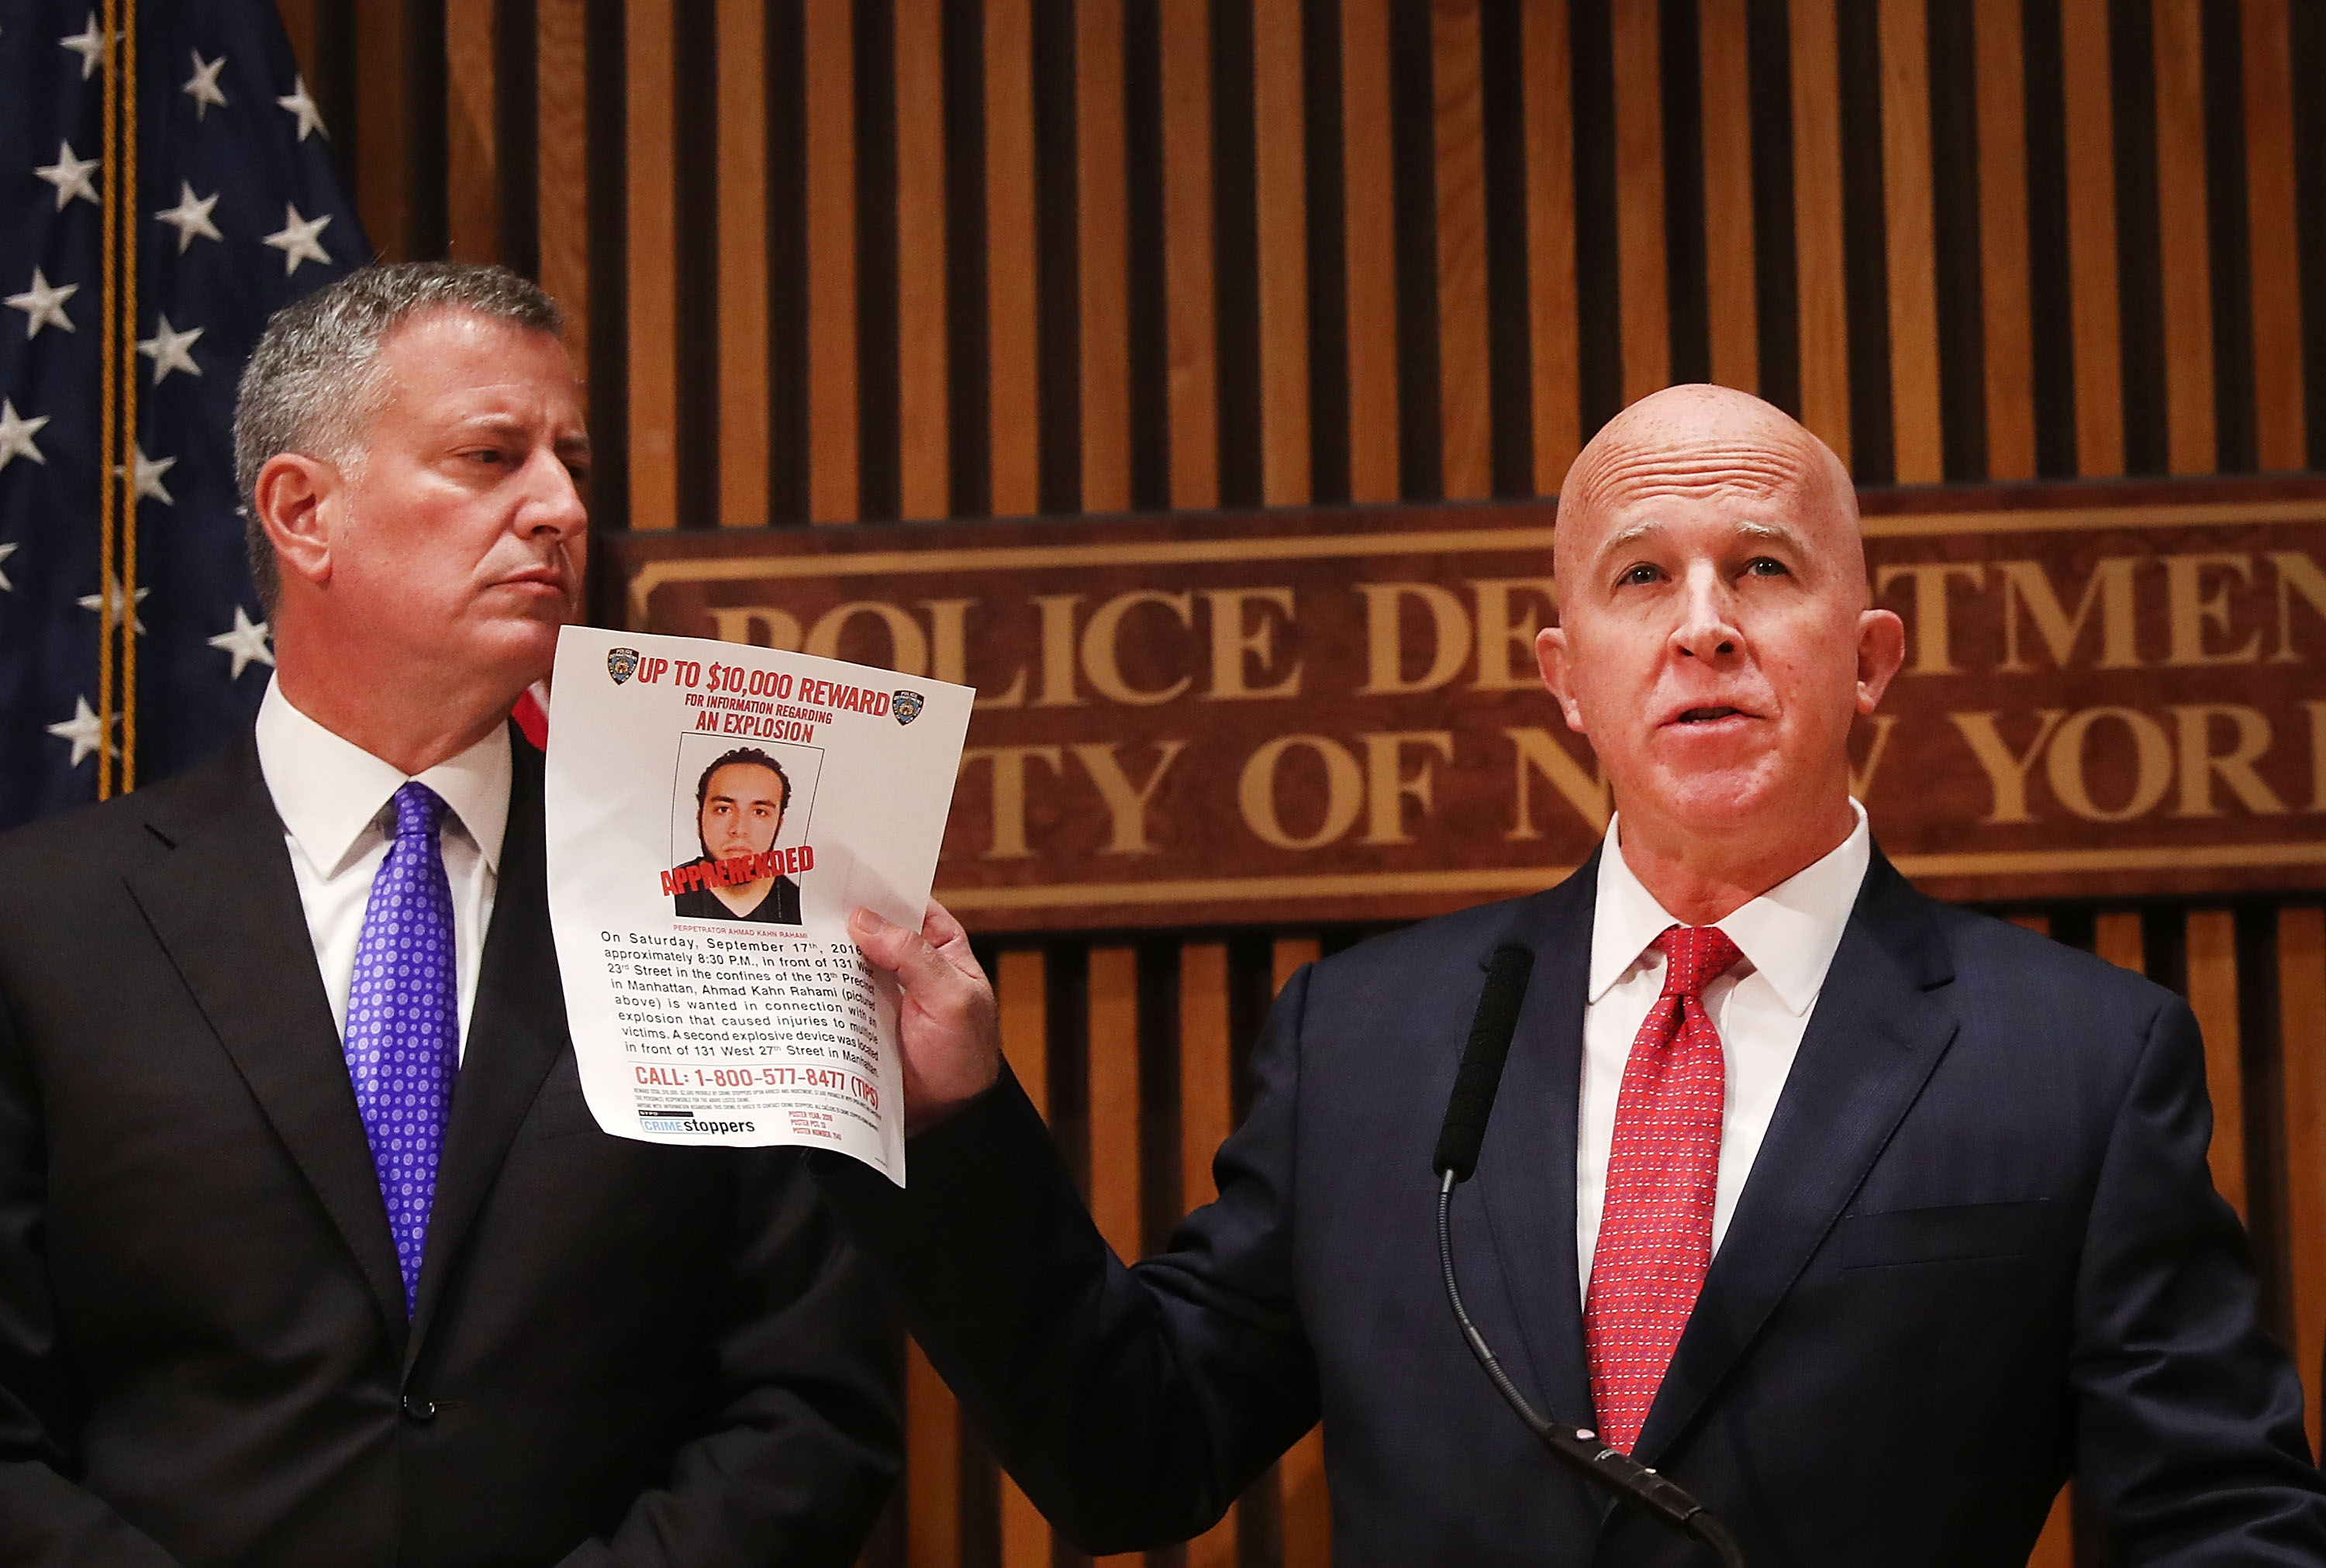 New York City police commissioner James O'Neill stands with Mayor Bill de Blasio as he holds up a picture of Ahmad Khan Rahami, the man believed to be responsible for the explosion in Manhattan on Saturday night and an earlier bombing in New Jersey, at a news conference at New York City on September 19, 2016 in New York City. Rahami was taken into custody on Monday afternoon.